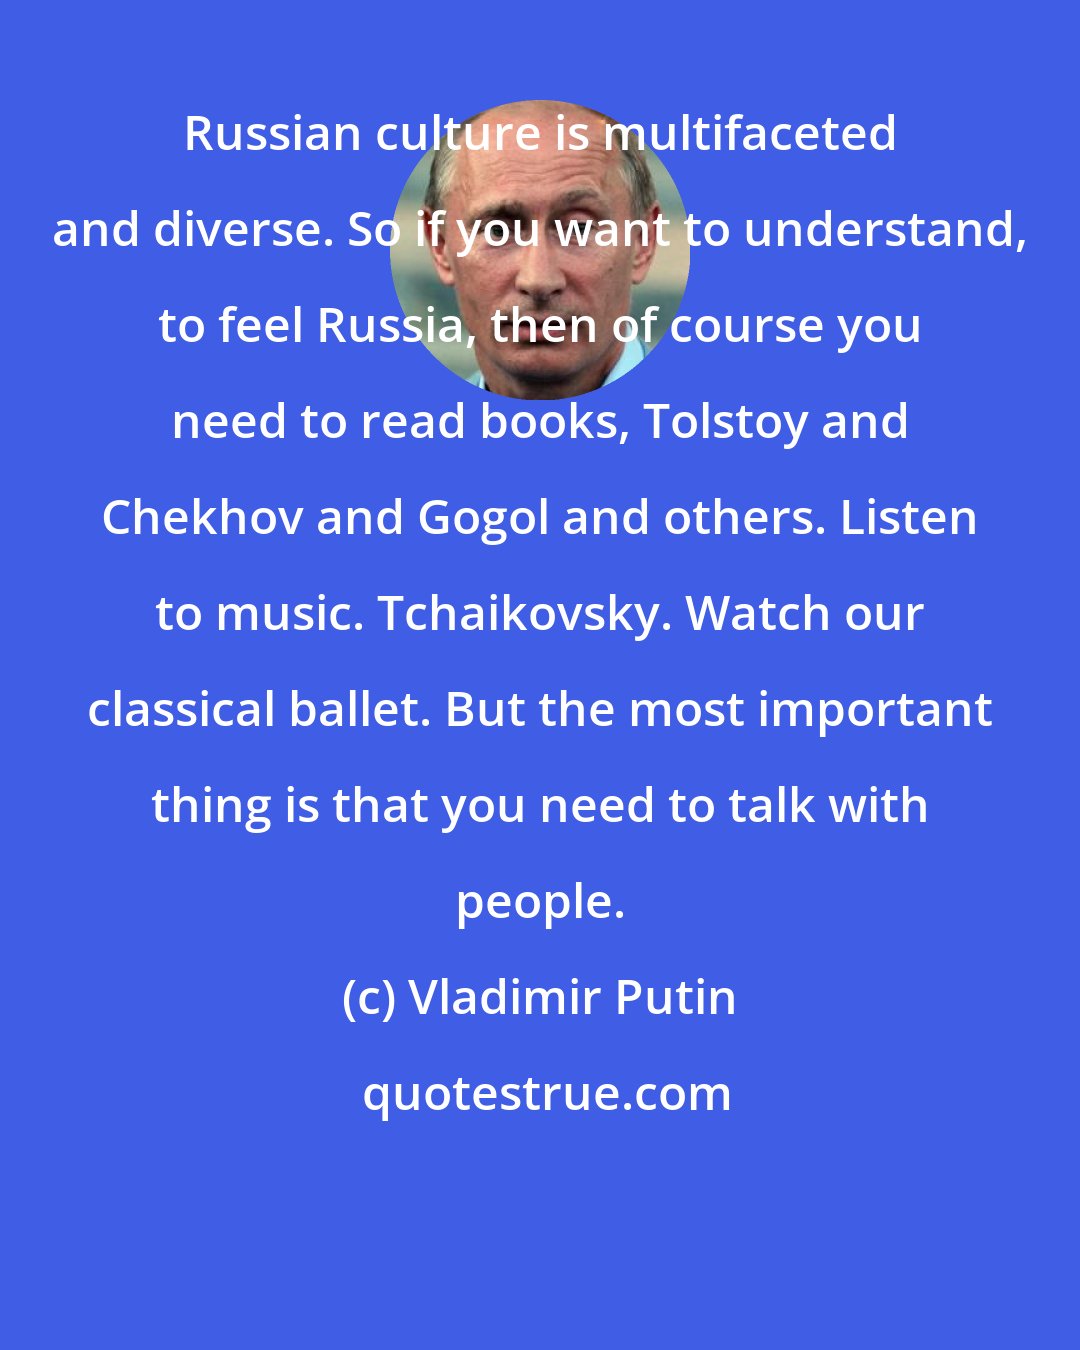 Vladimir Putin: Russian culture is multifaceted and diverse. So if you want to understand, to feel Russia, then of course you need to read books, Tolstoy and Chekhov and Gogol and others. Listen to music. Tchaikovsky. Watch our classical ballet. But the most important thing is that you need to talk with people.